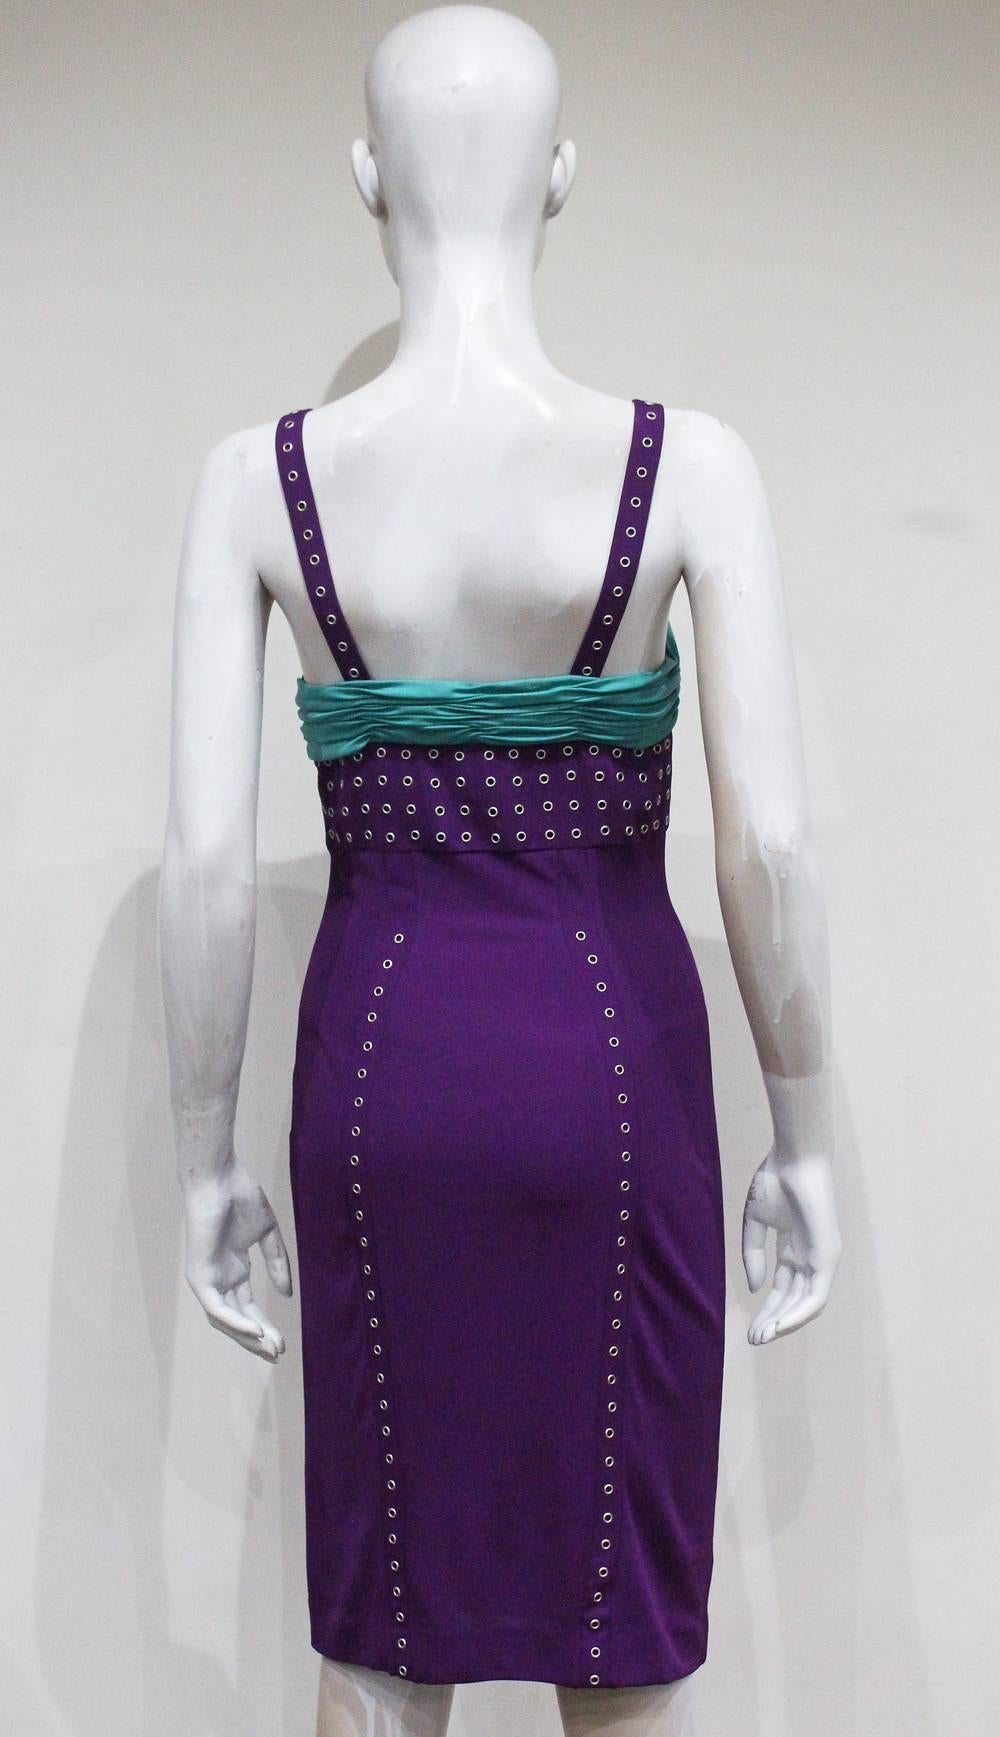 Women's Gianni Versace studded evening dress, c. 1990s For Sale